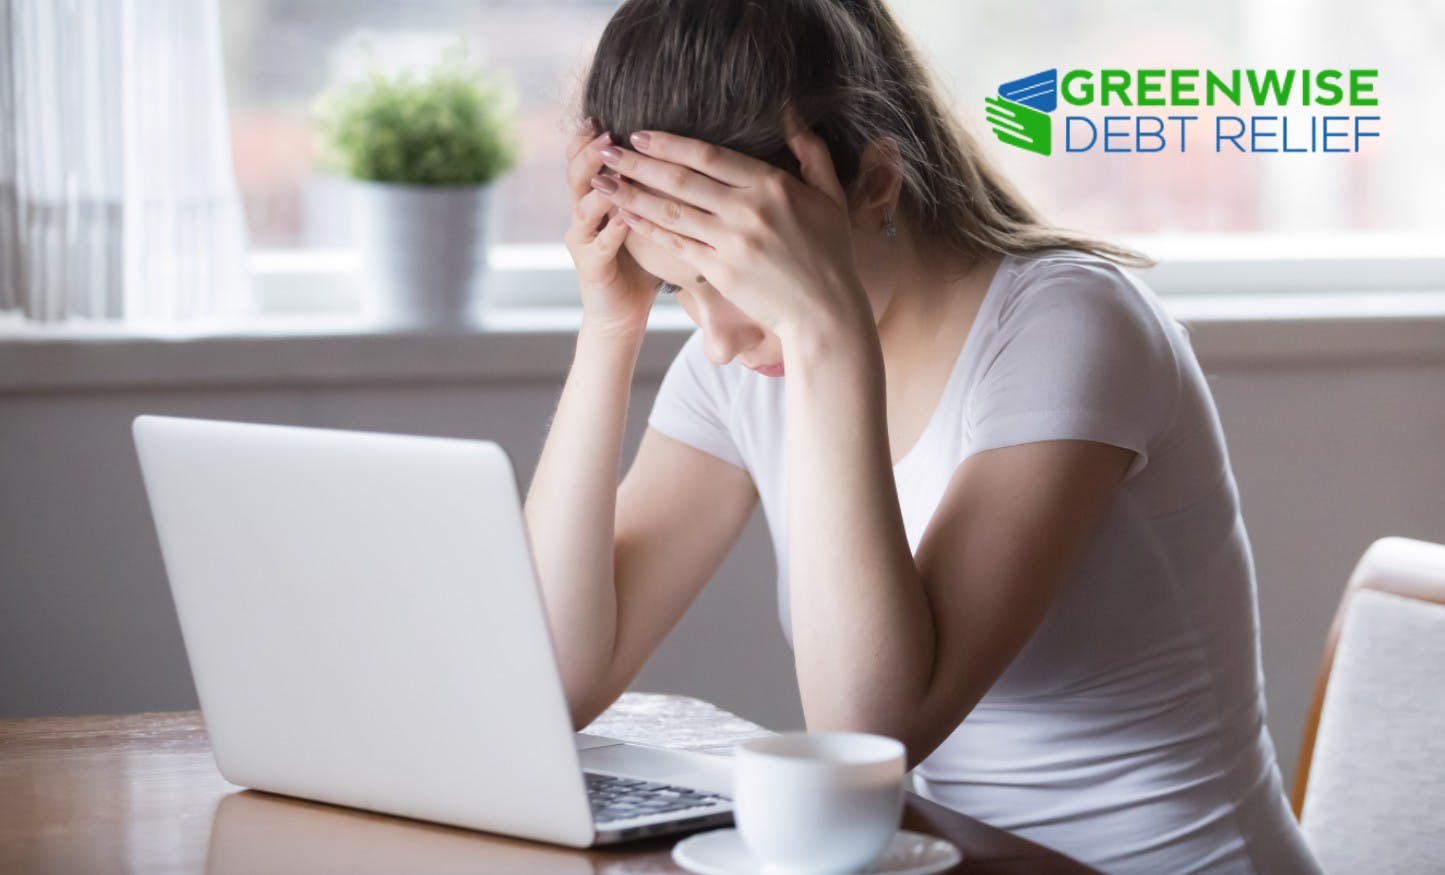 Greenwise Debt Relief Review: How Wise Are They?